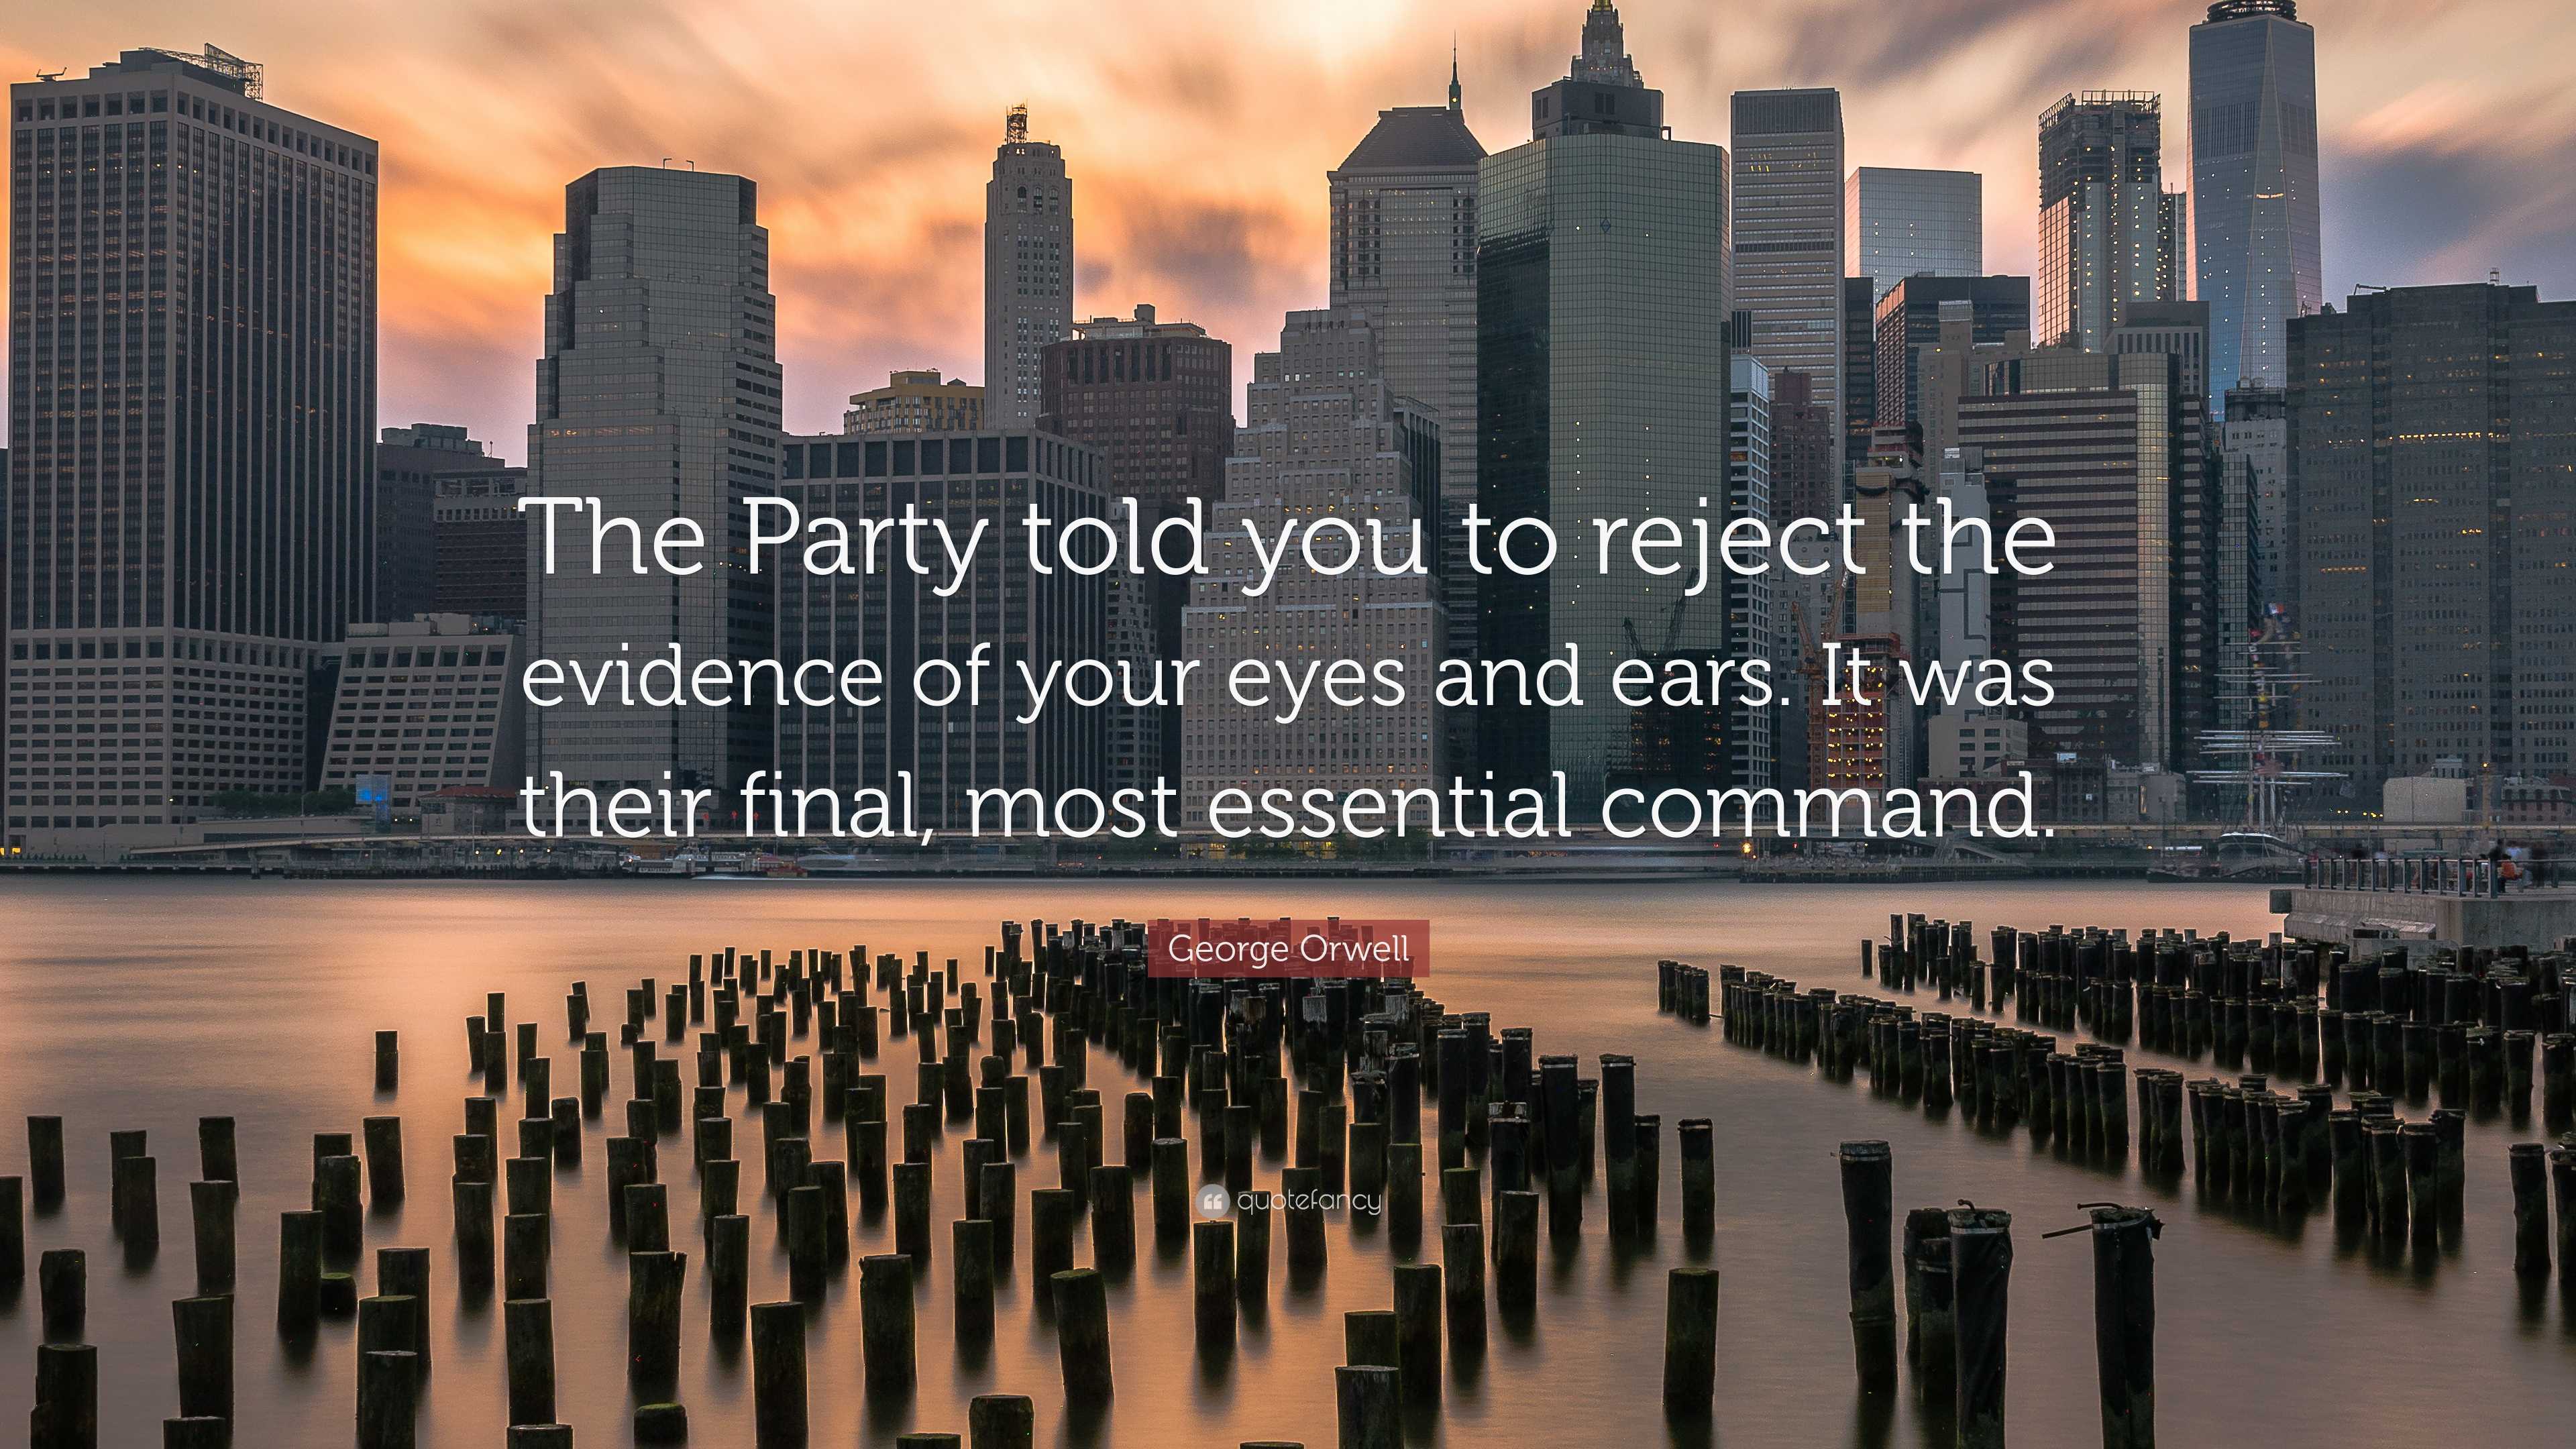 https://quotefancy.com/media/wallpaper/3840x2160/7715827-George-Orwell-Quote-The-Party-told-you-to-reject-the-evidence-of.jpg